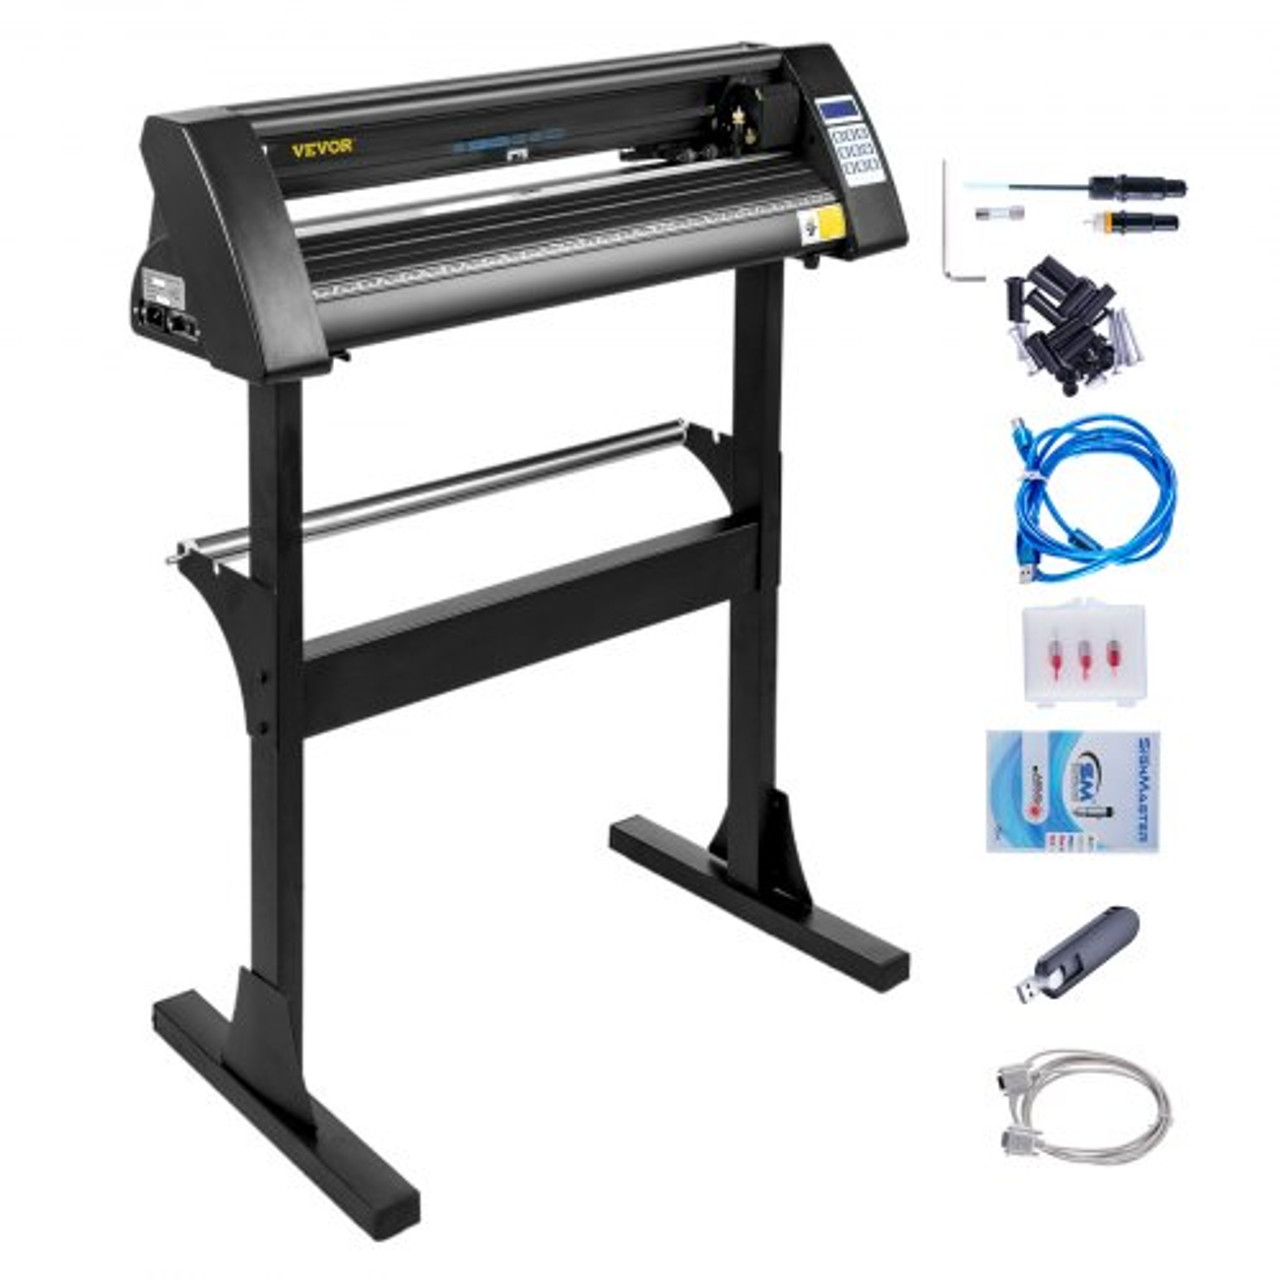 VEVOR Vinyl Cutter 28 in. LCD Display Adjustable Double-Spring Pinch Rollers Sign Cutting Plotter with Signmaster software, Black